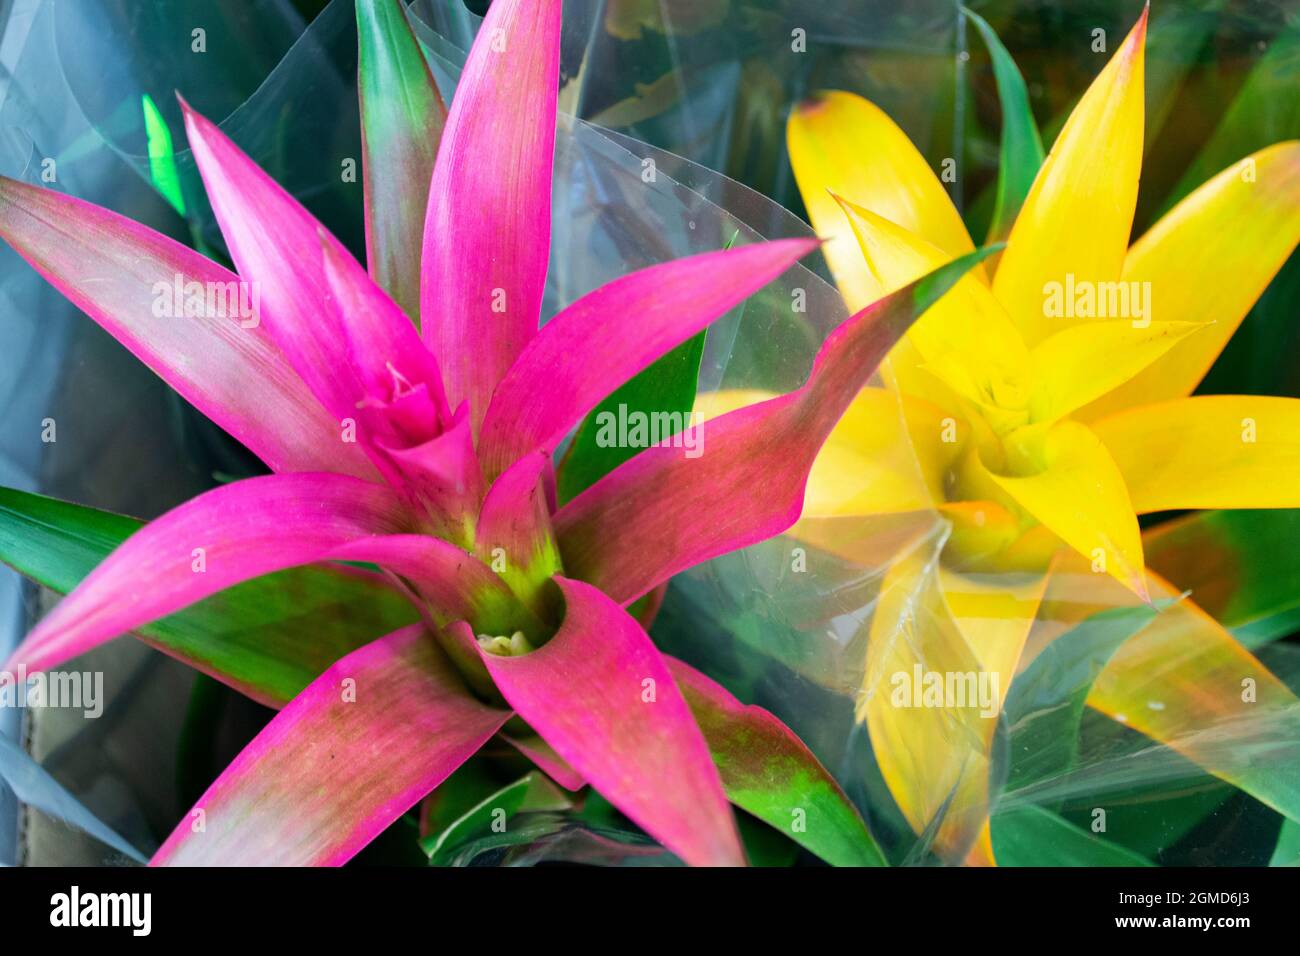 Pots with decorative flowers Guzmania lingulata with pink and yellow flowers close up Stock Photo